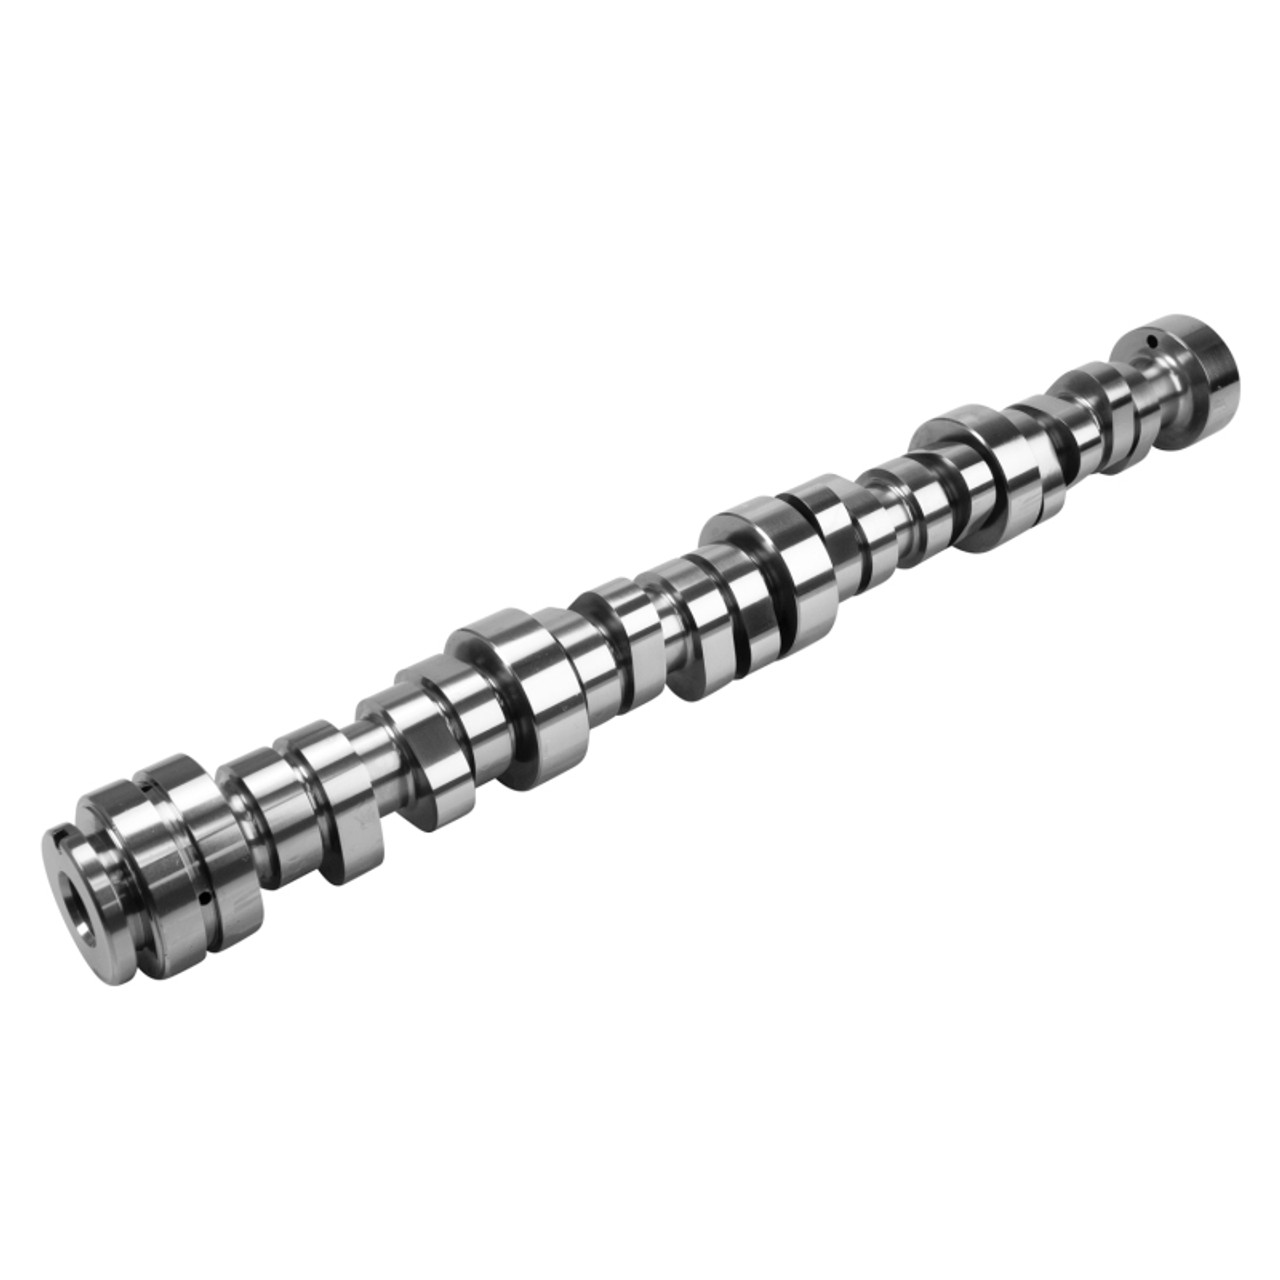 COMP Cams 7.3L Godzilla Stage 2 NSR Hydraulic Roller Camshaft - 405-203-17 Photo - Primary